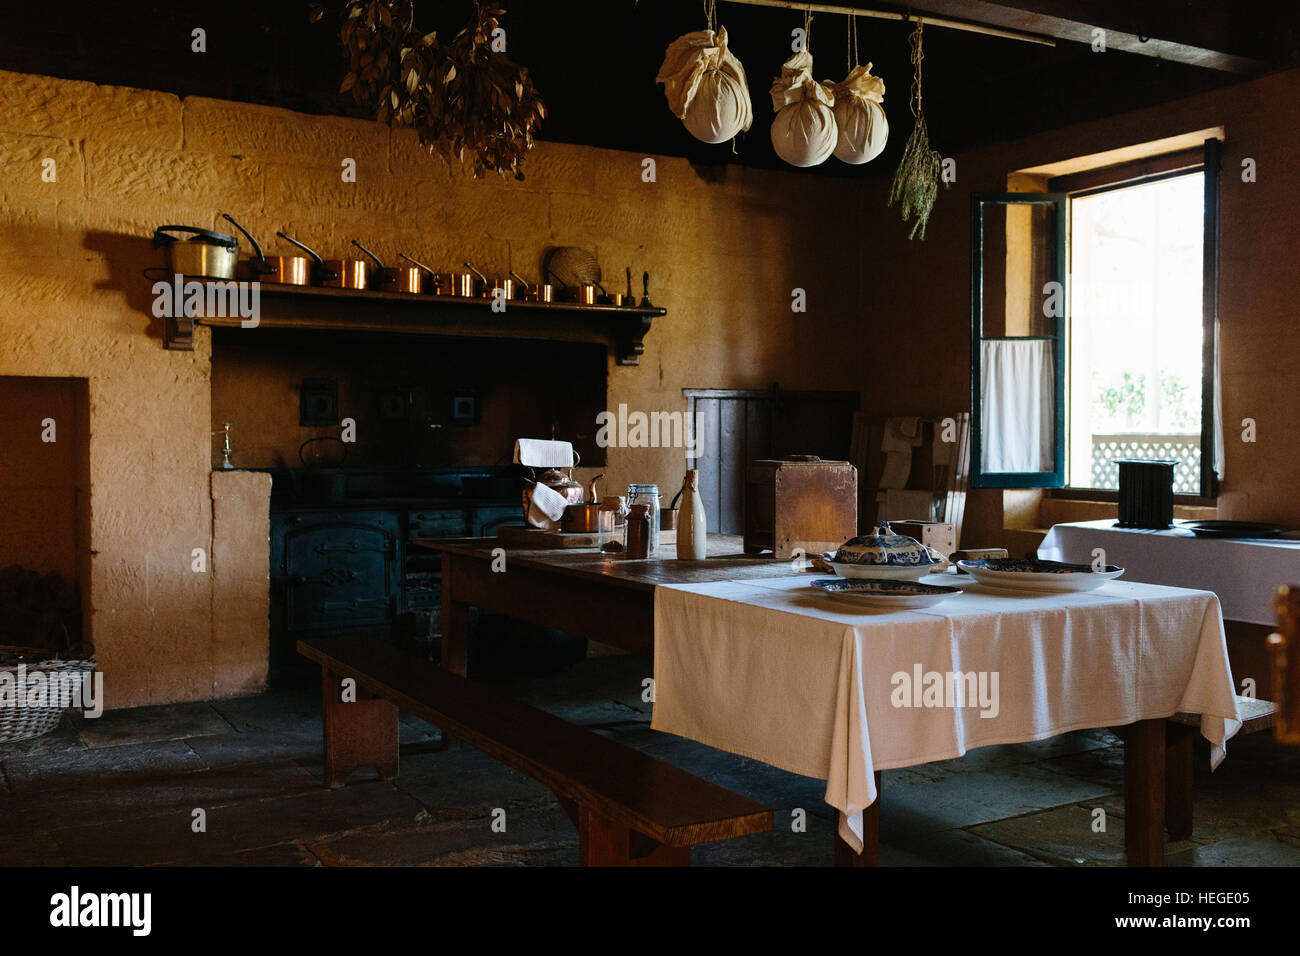 Interior of the kitchen at Elizabeth Farm, an historical homestead and museum in Sydney Australia Stock Photo